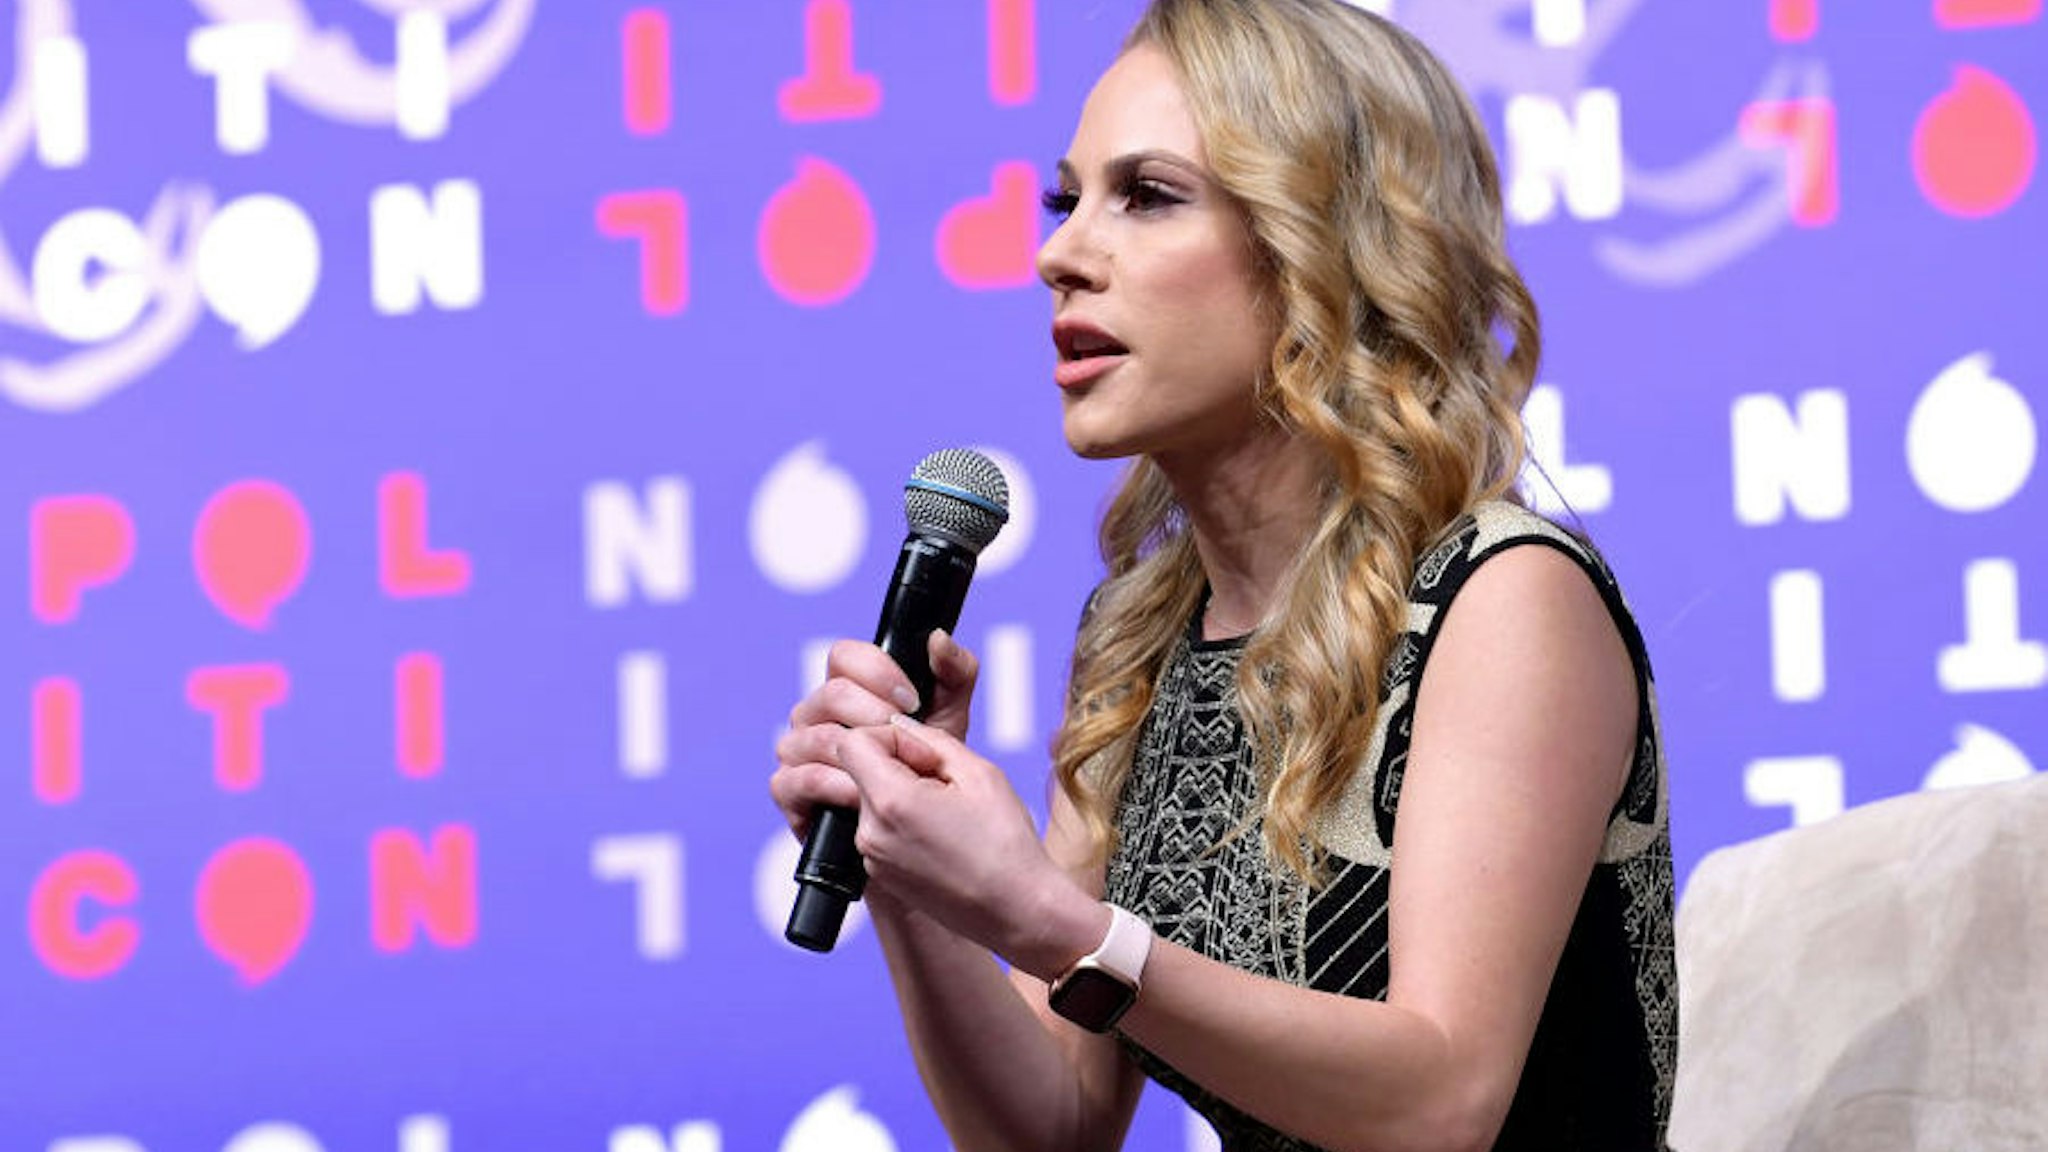 Ana Kasparian speaks onstage during the 2019 Politicon at Music City Center on October 26, 2019 in Nashville, Tennessee.